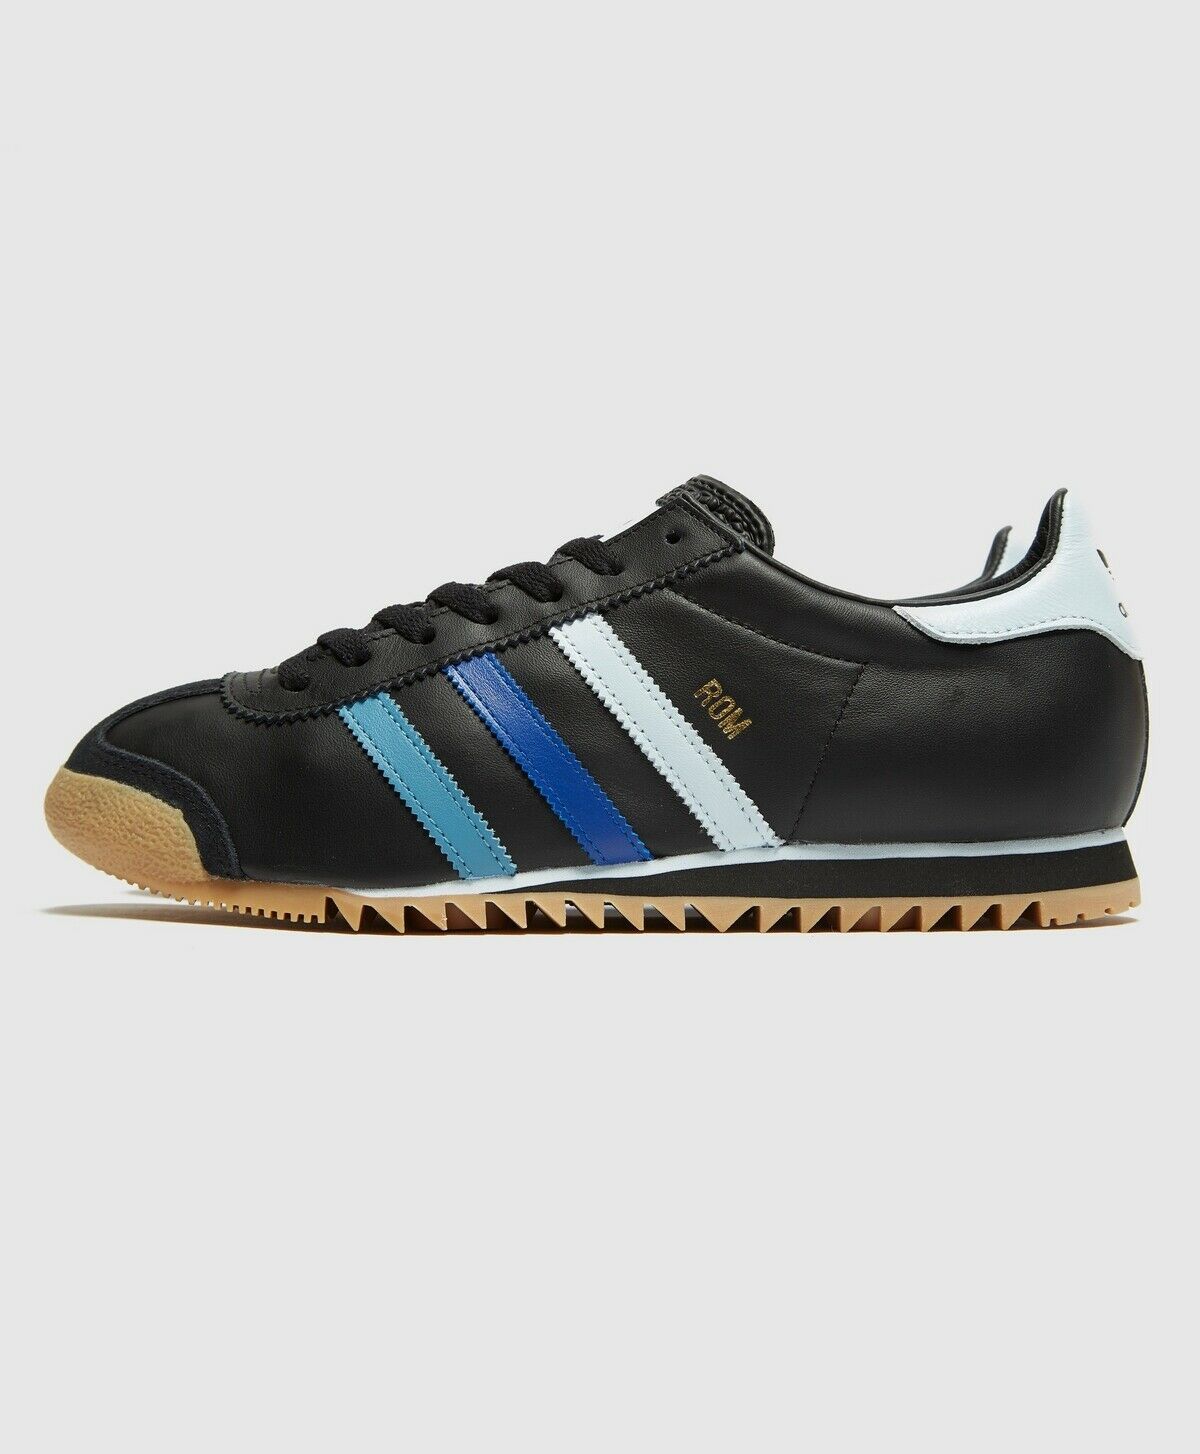 adidas Originals Rom Leather Shoes in Black Trainers